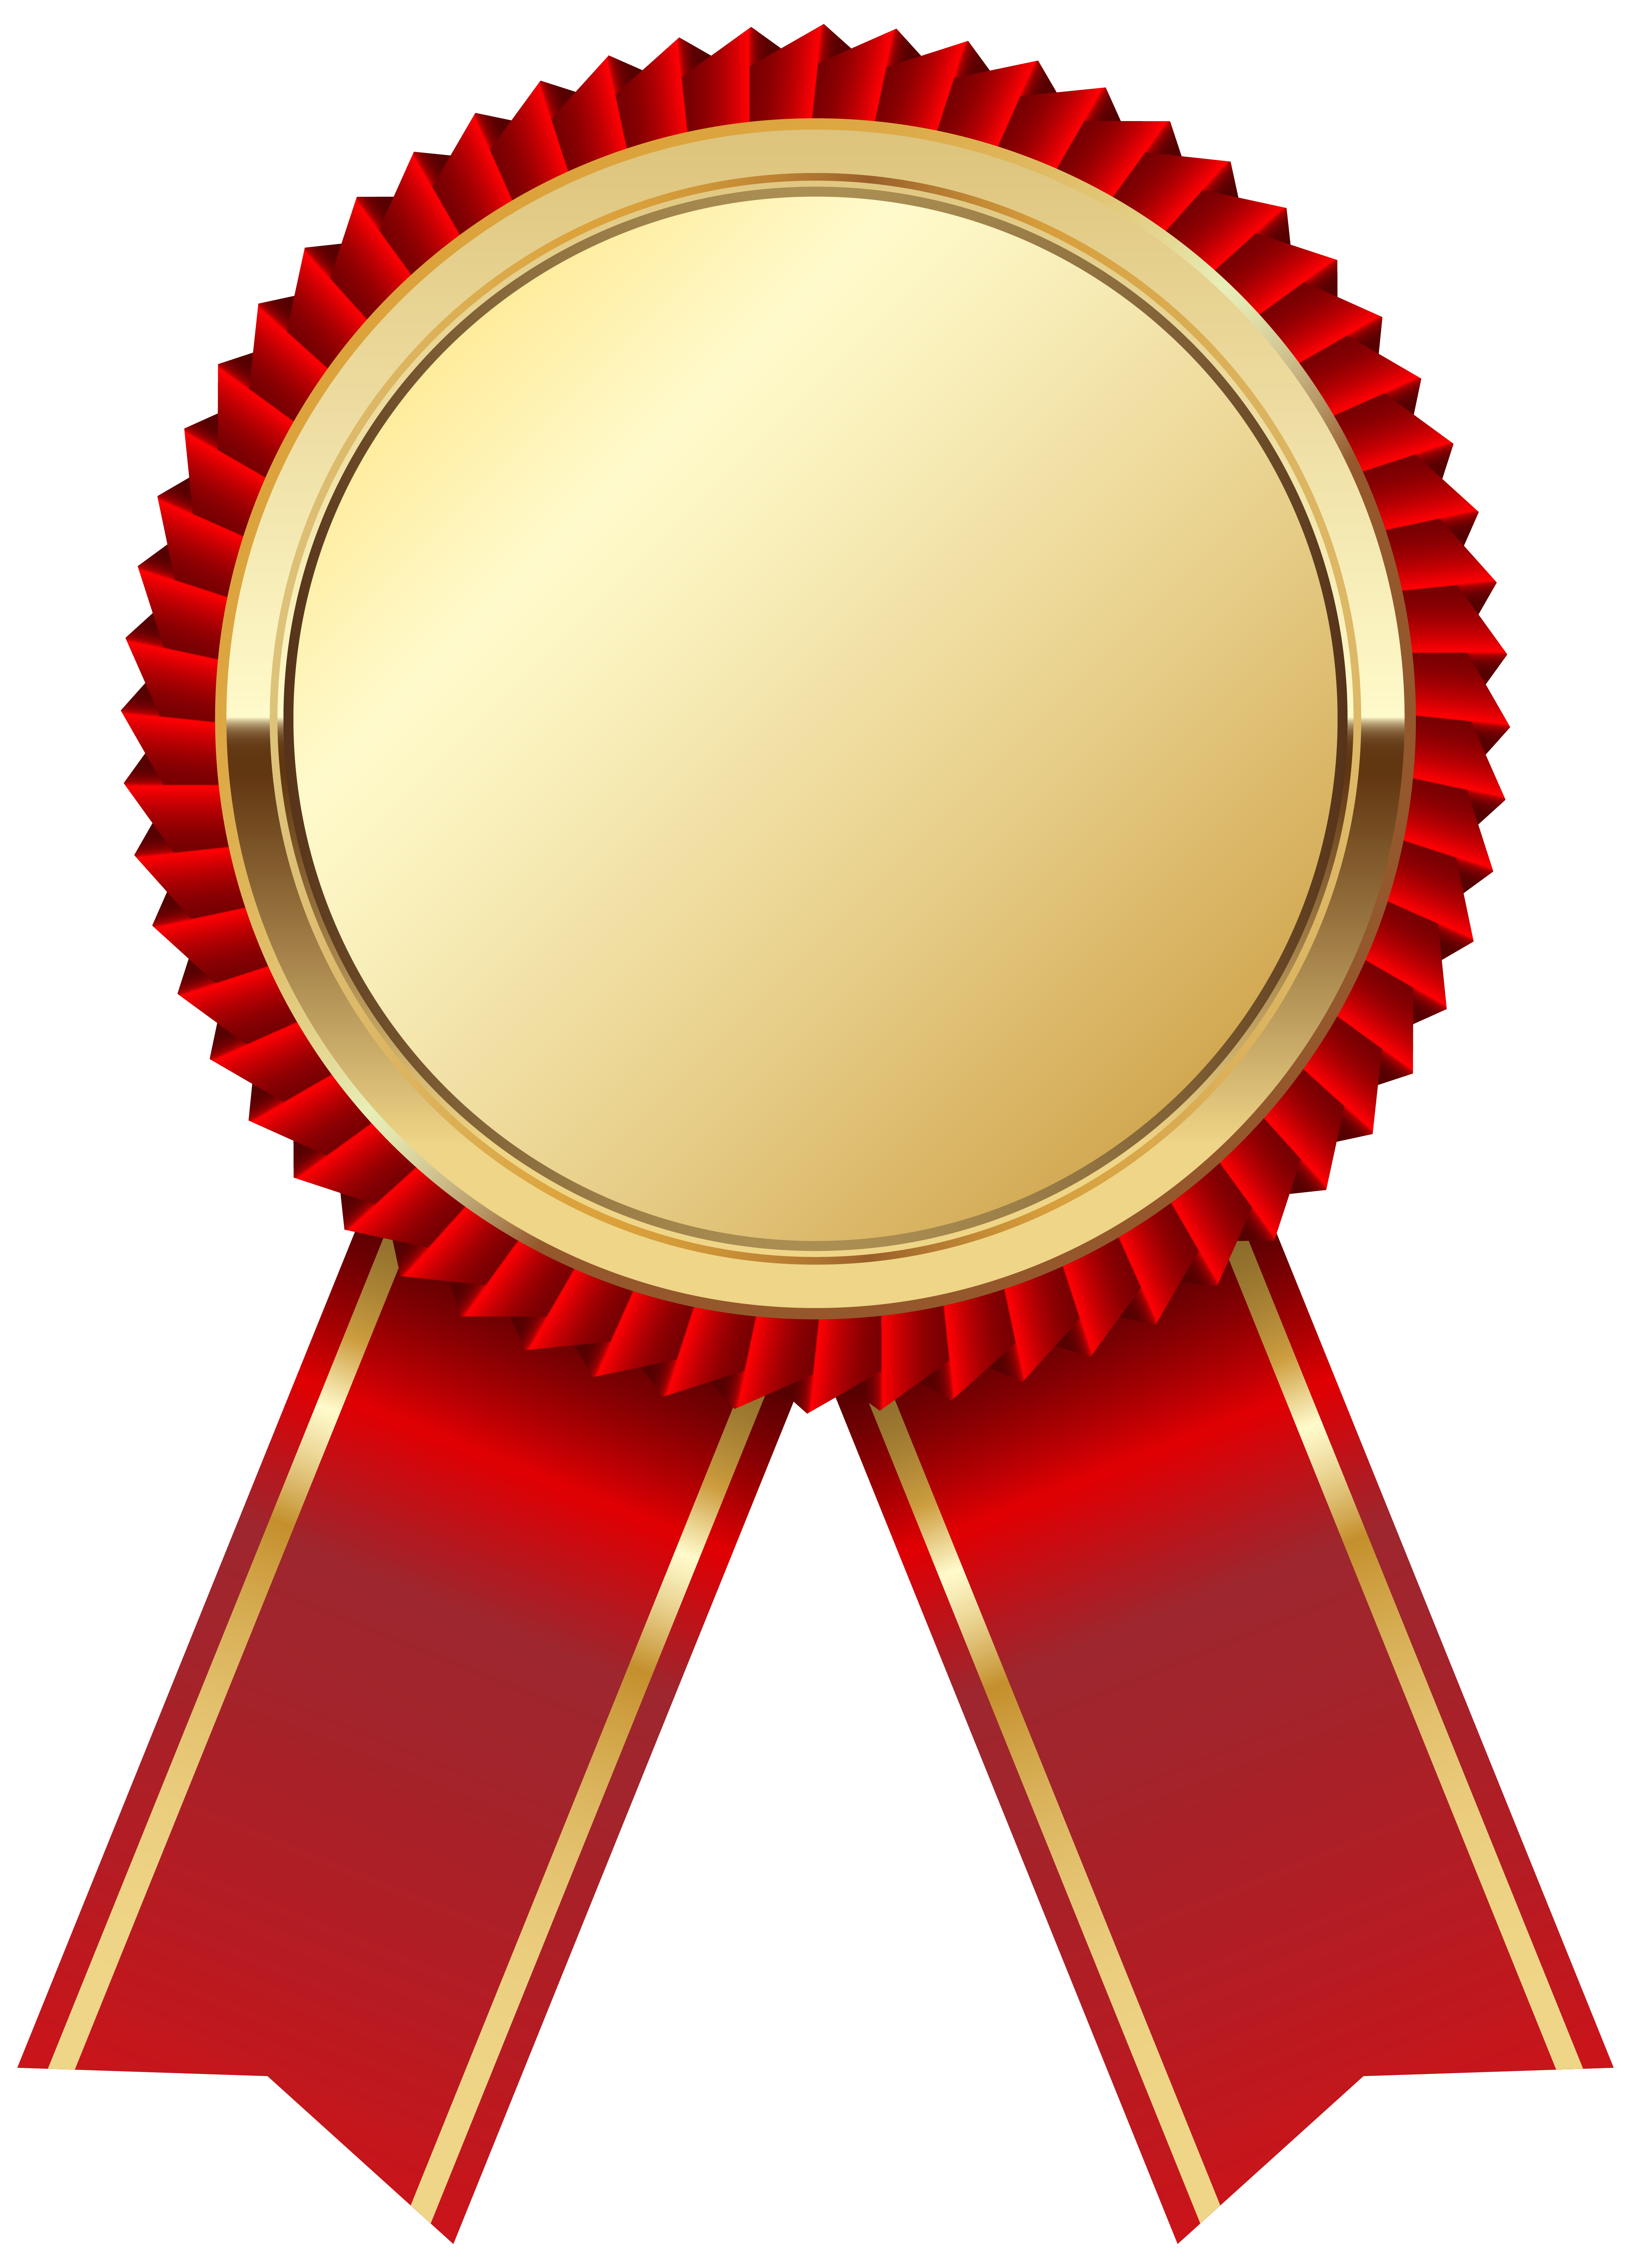 clipart images of medals - photo #37